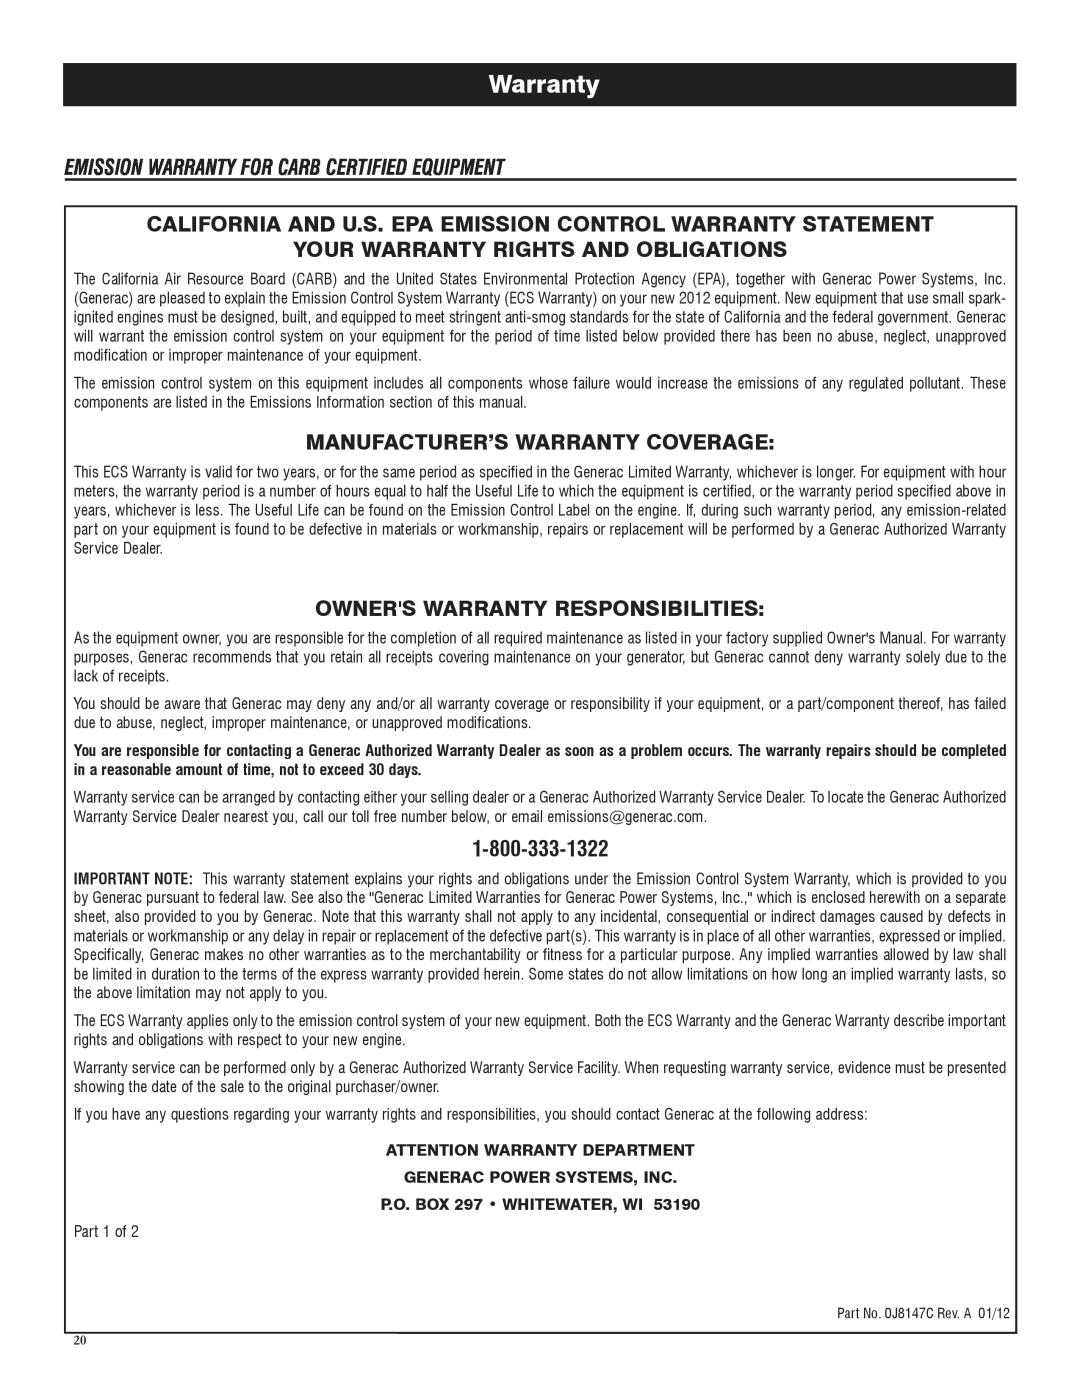 Honeywell 6039 California And U.S. Epa Emission Control Warranty Statement, Your Warranty Rights And Obligations 